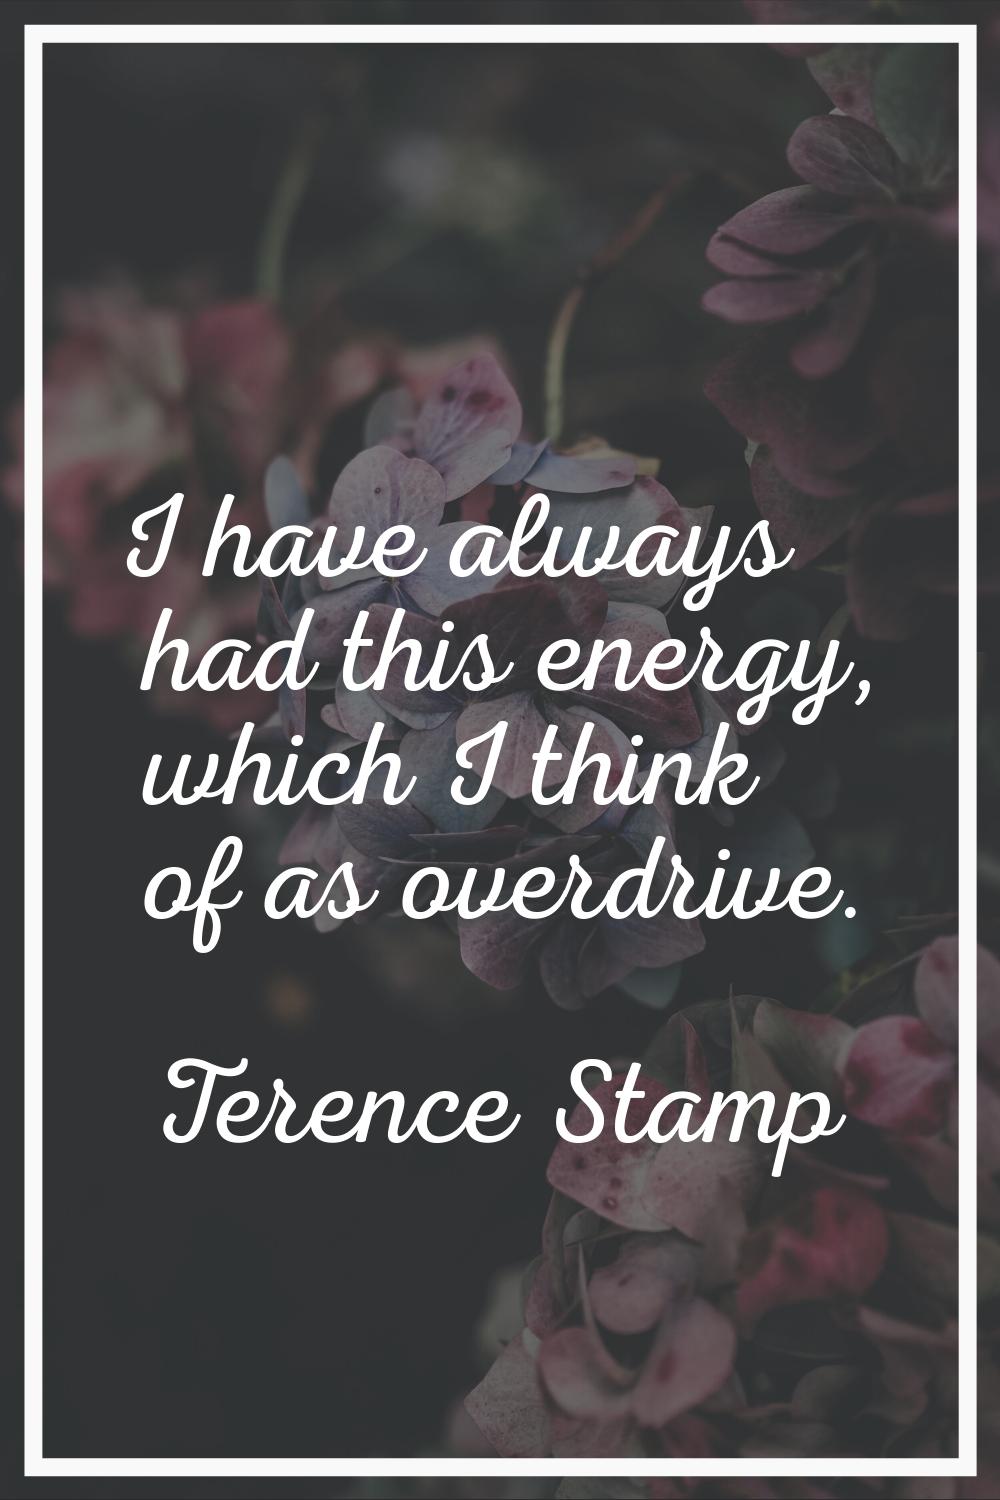 I have always had this energy, which I think of as overdrive.